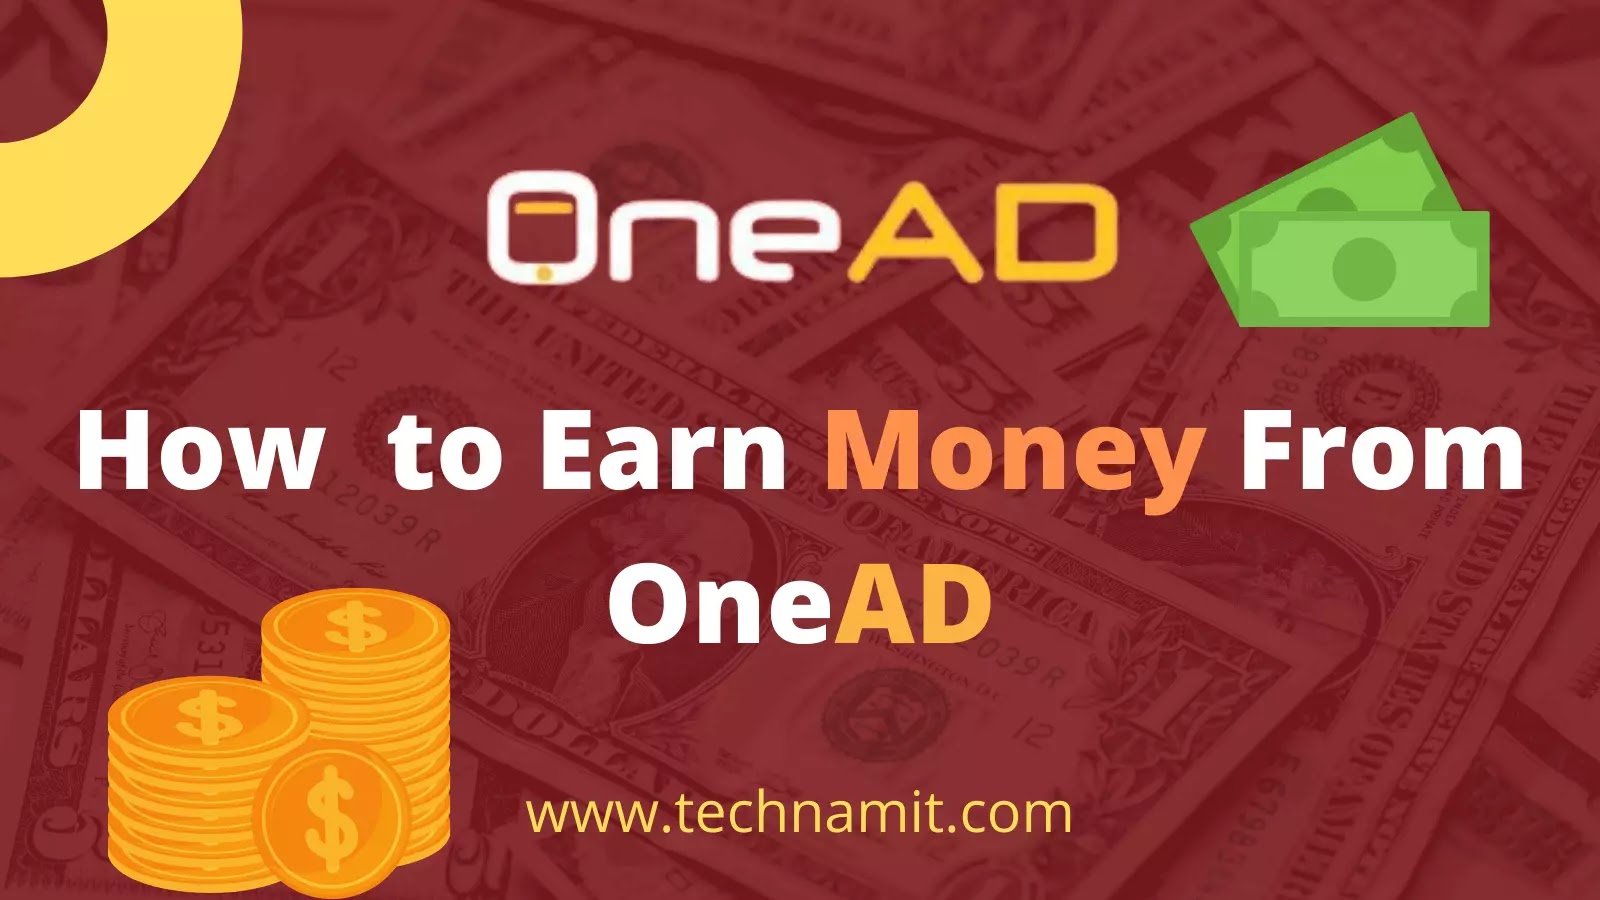 how to earn money from onead app